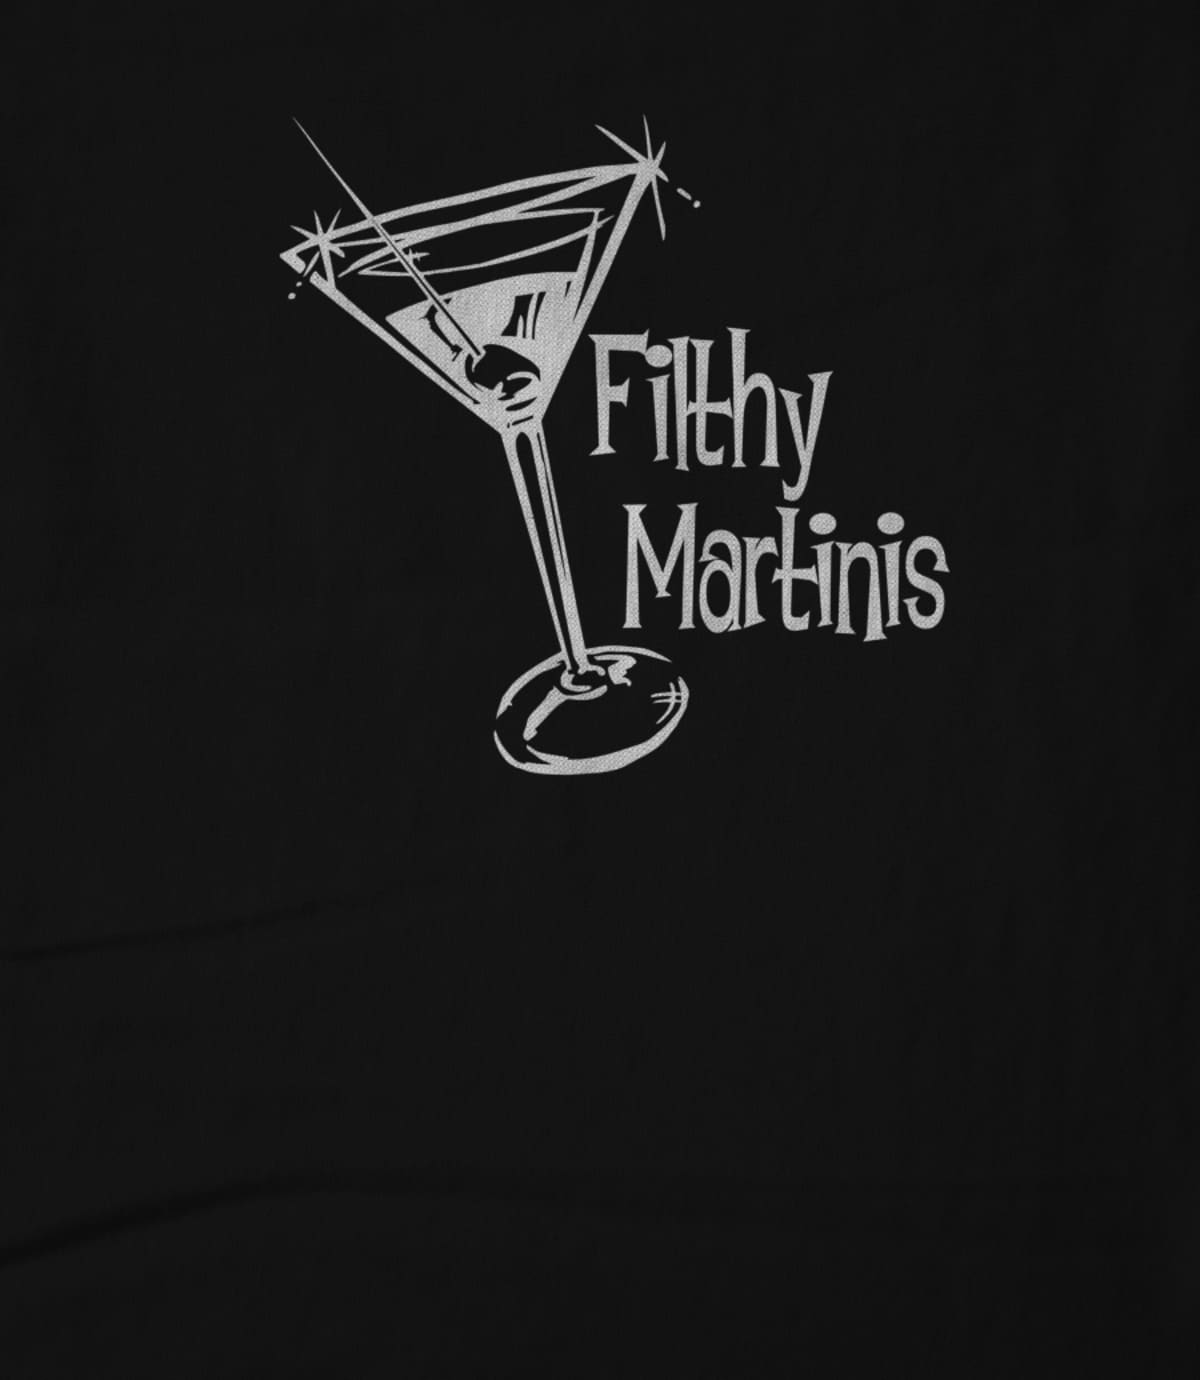 Filthy Martinis